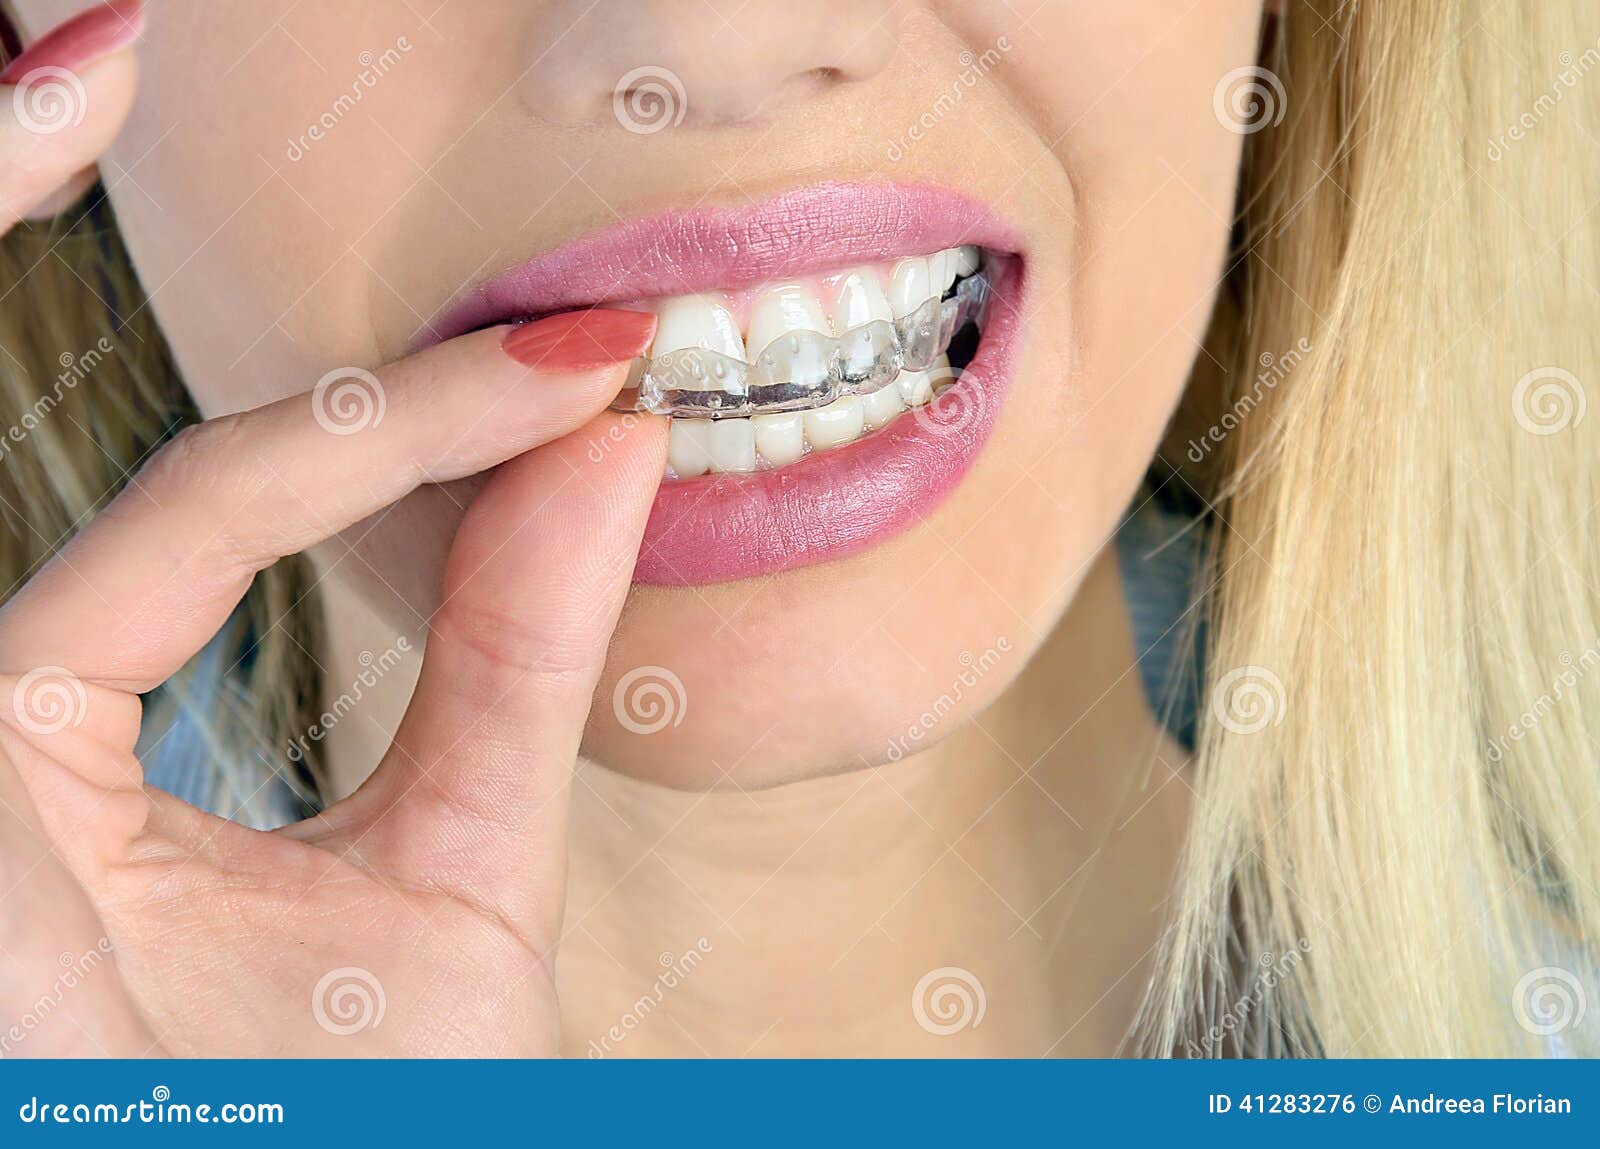 woman with mouthguard